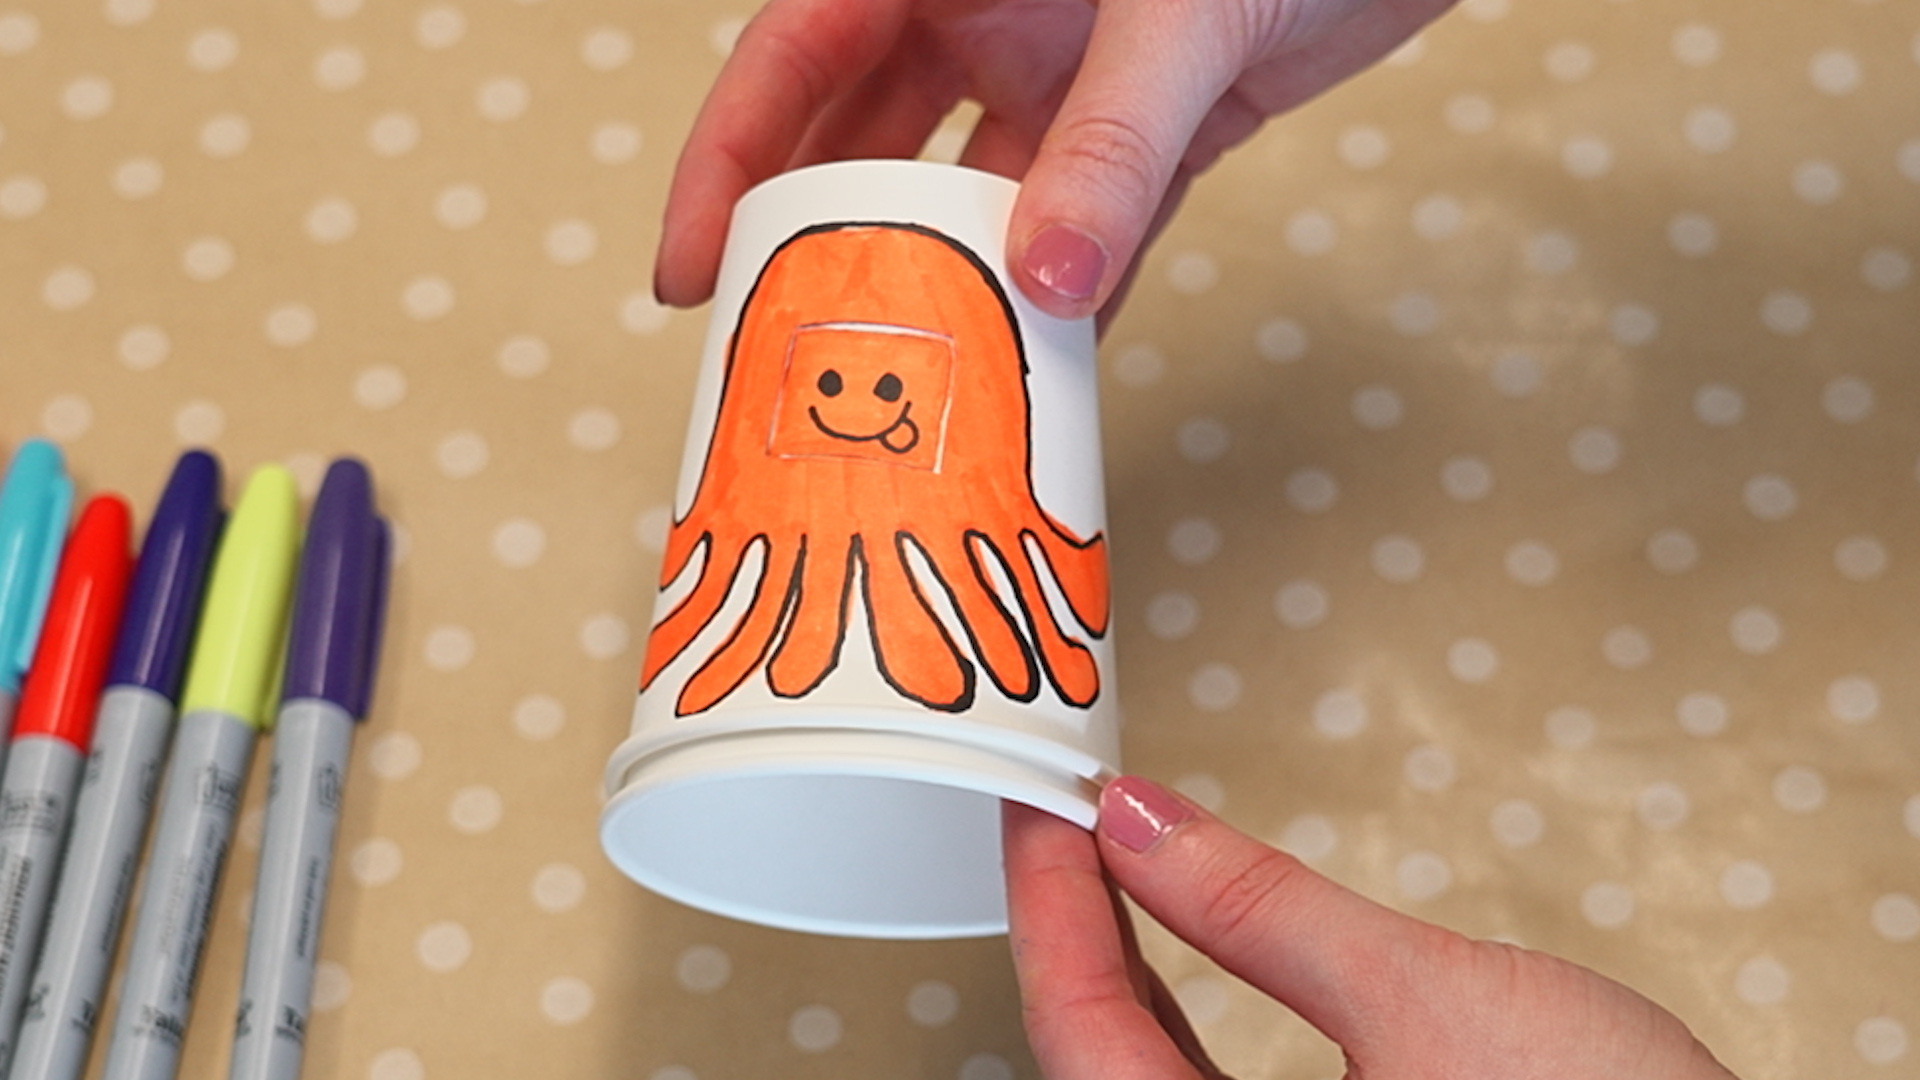 An octopus drawn on the side of the cup